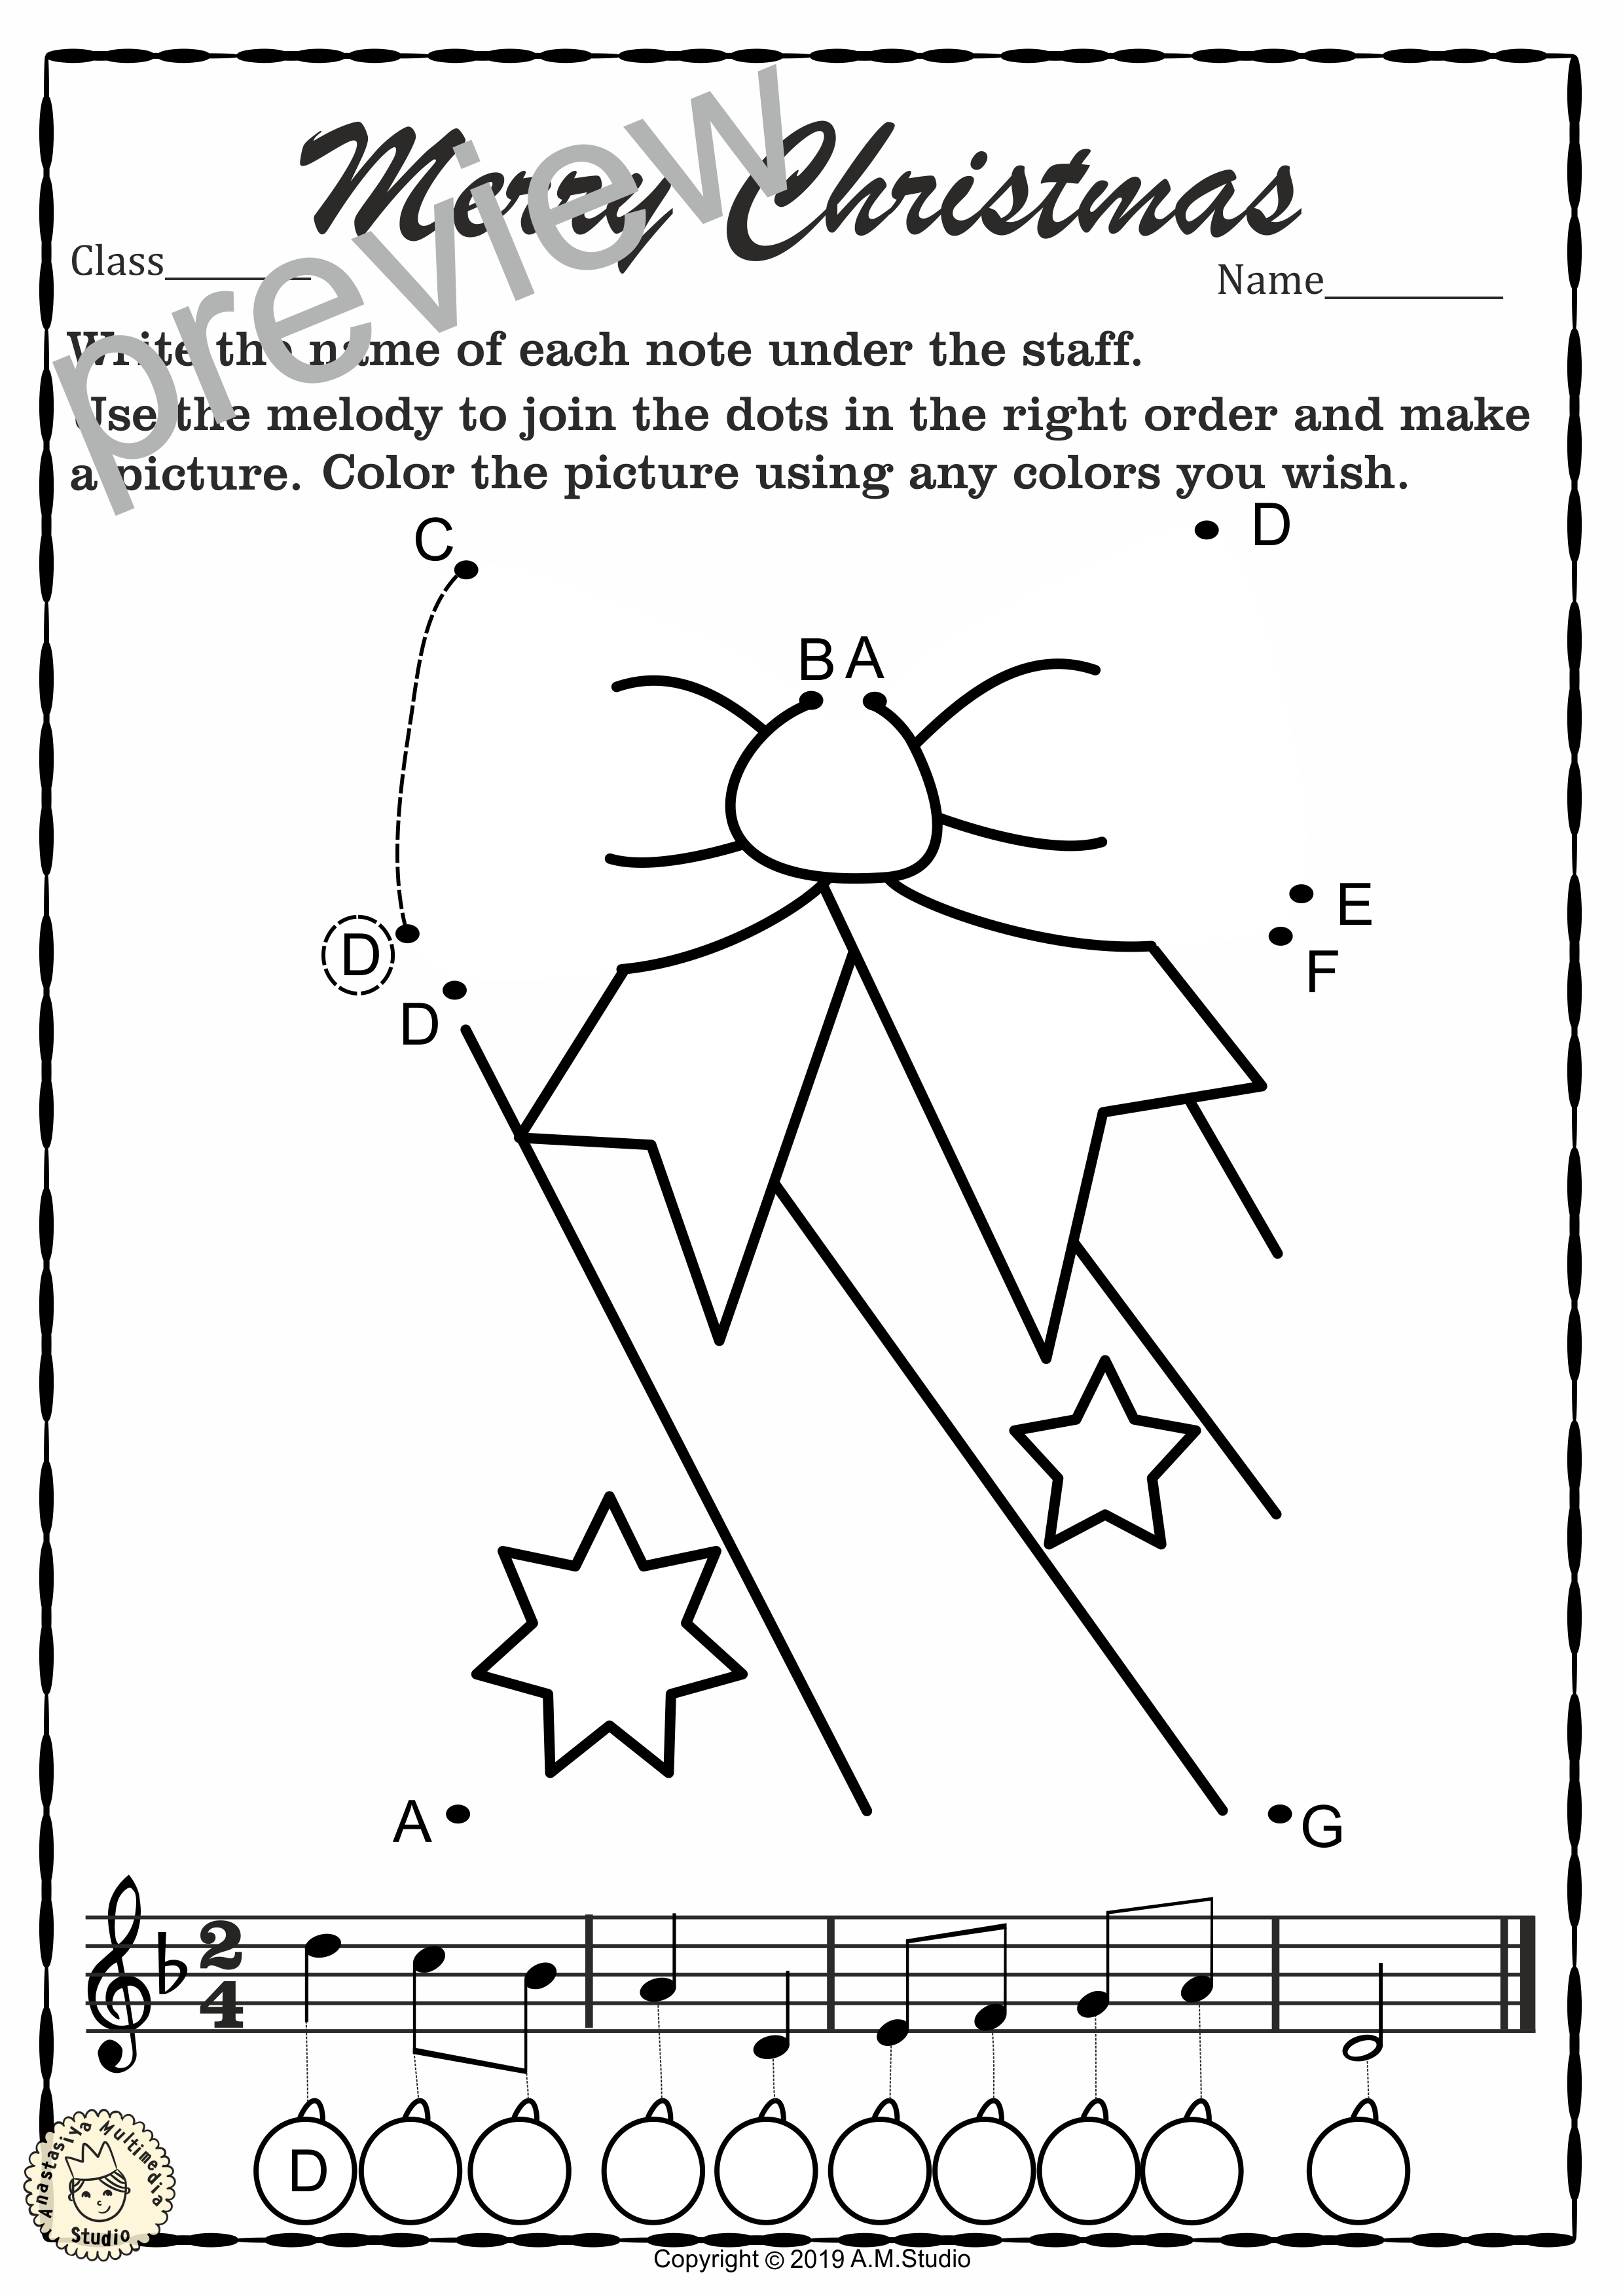 Christmas Dot to Dot Note Reading Worksheets {Treble Clef} with answers (img # 4)